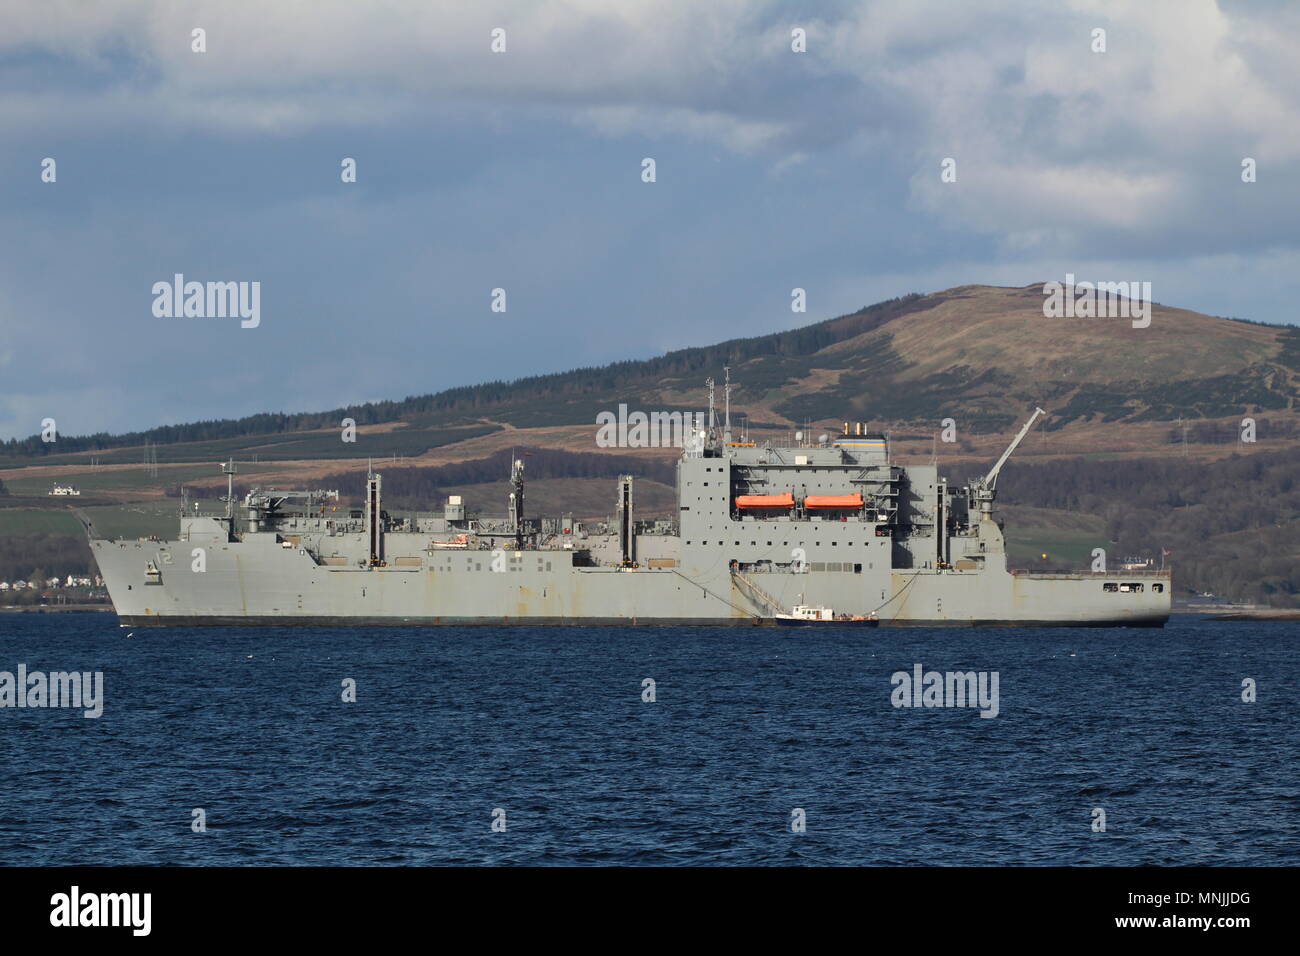 USNS William McLean (T-AKE-12), a Lewis and Clark-class replenishment vessel operated by the US Navy, off Greenock during Exercise Joint Warrior 18-1. Stock Photo